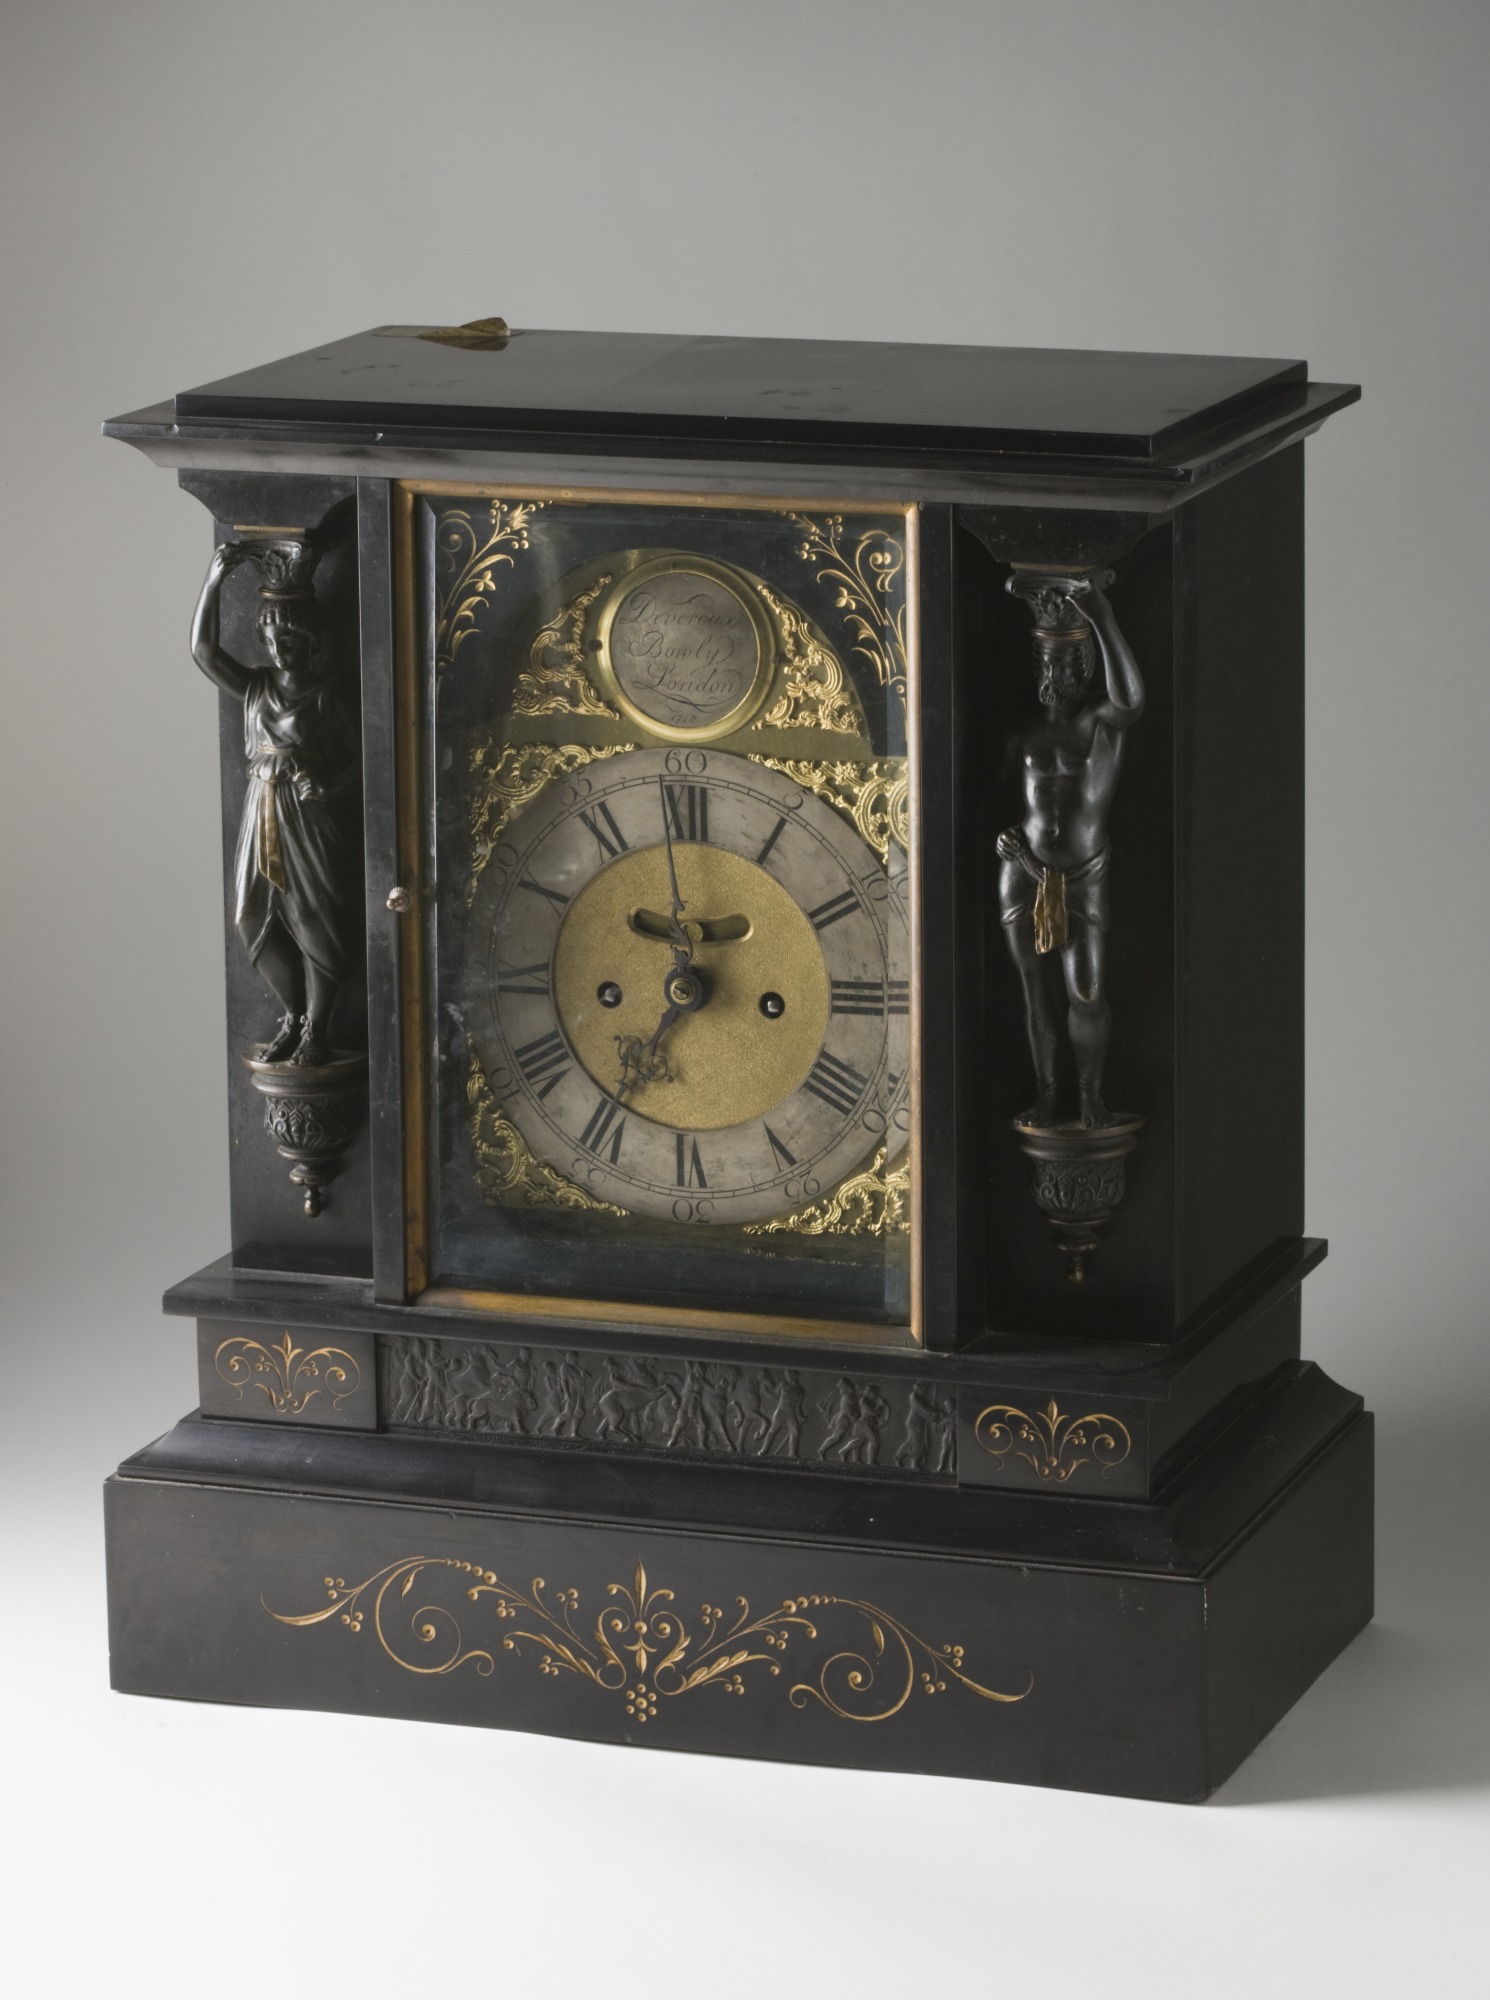 Black Devereux Bowly clock. This clock was brought to Australia by the Blaxland family in the early 1800s.  